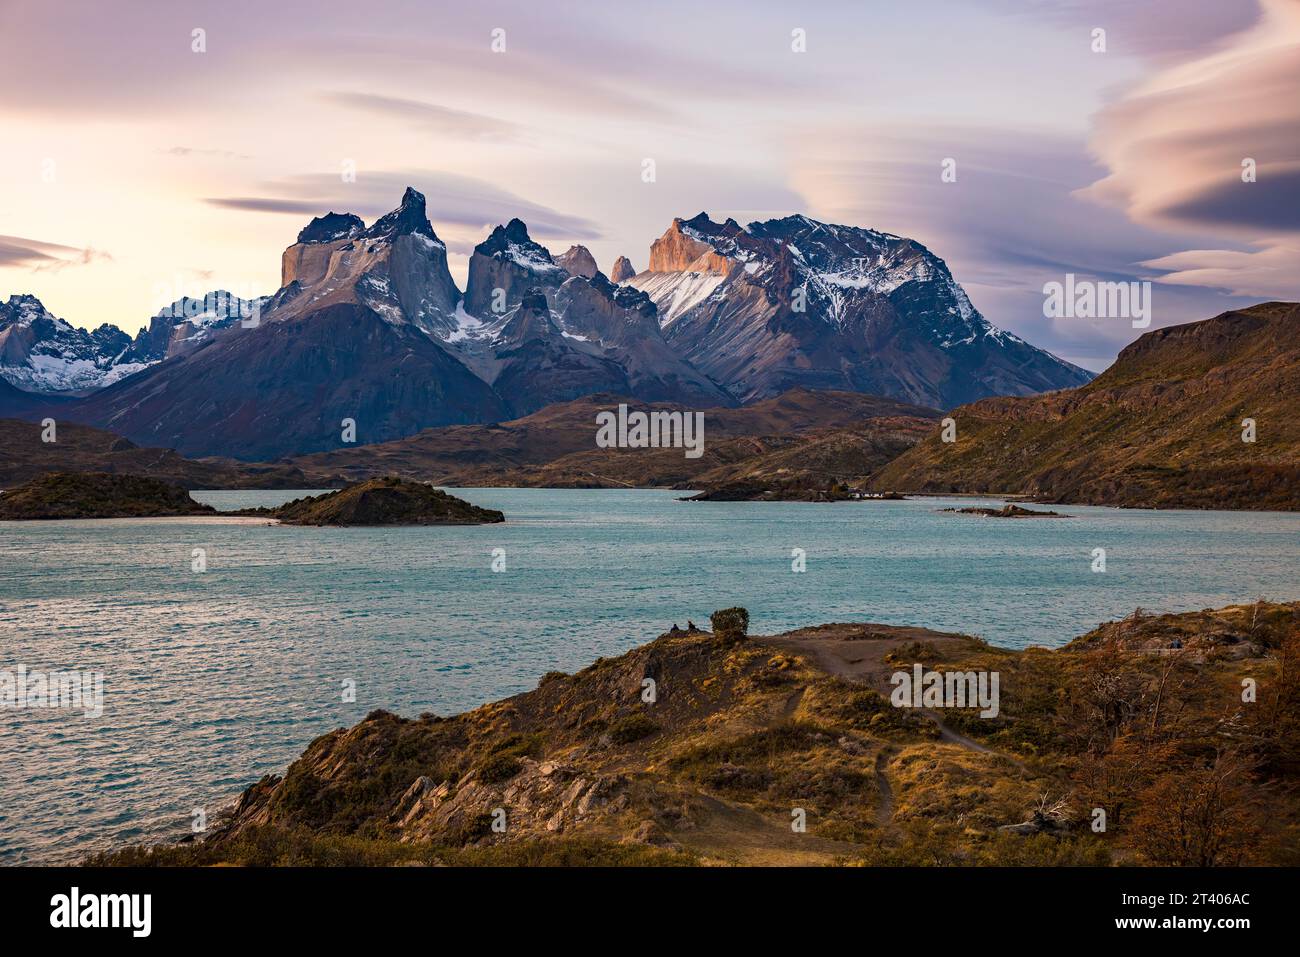 Los Cuernos del Paine at Lake Pehoe are the landmark of Torres del Paine National Park, Chile, Patagonia, South America Stock Photo